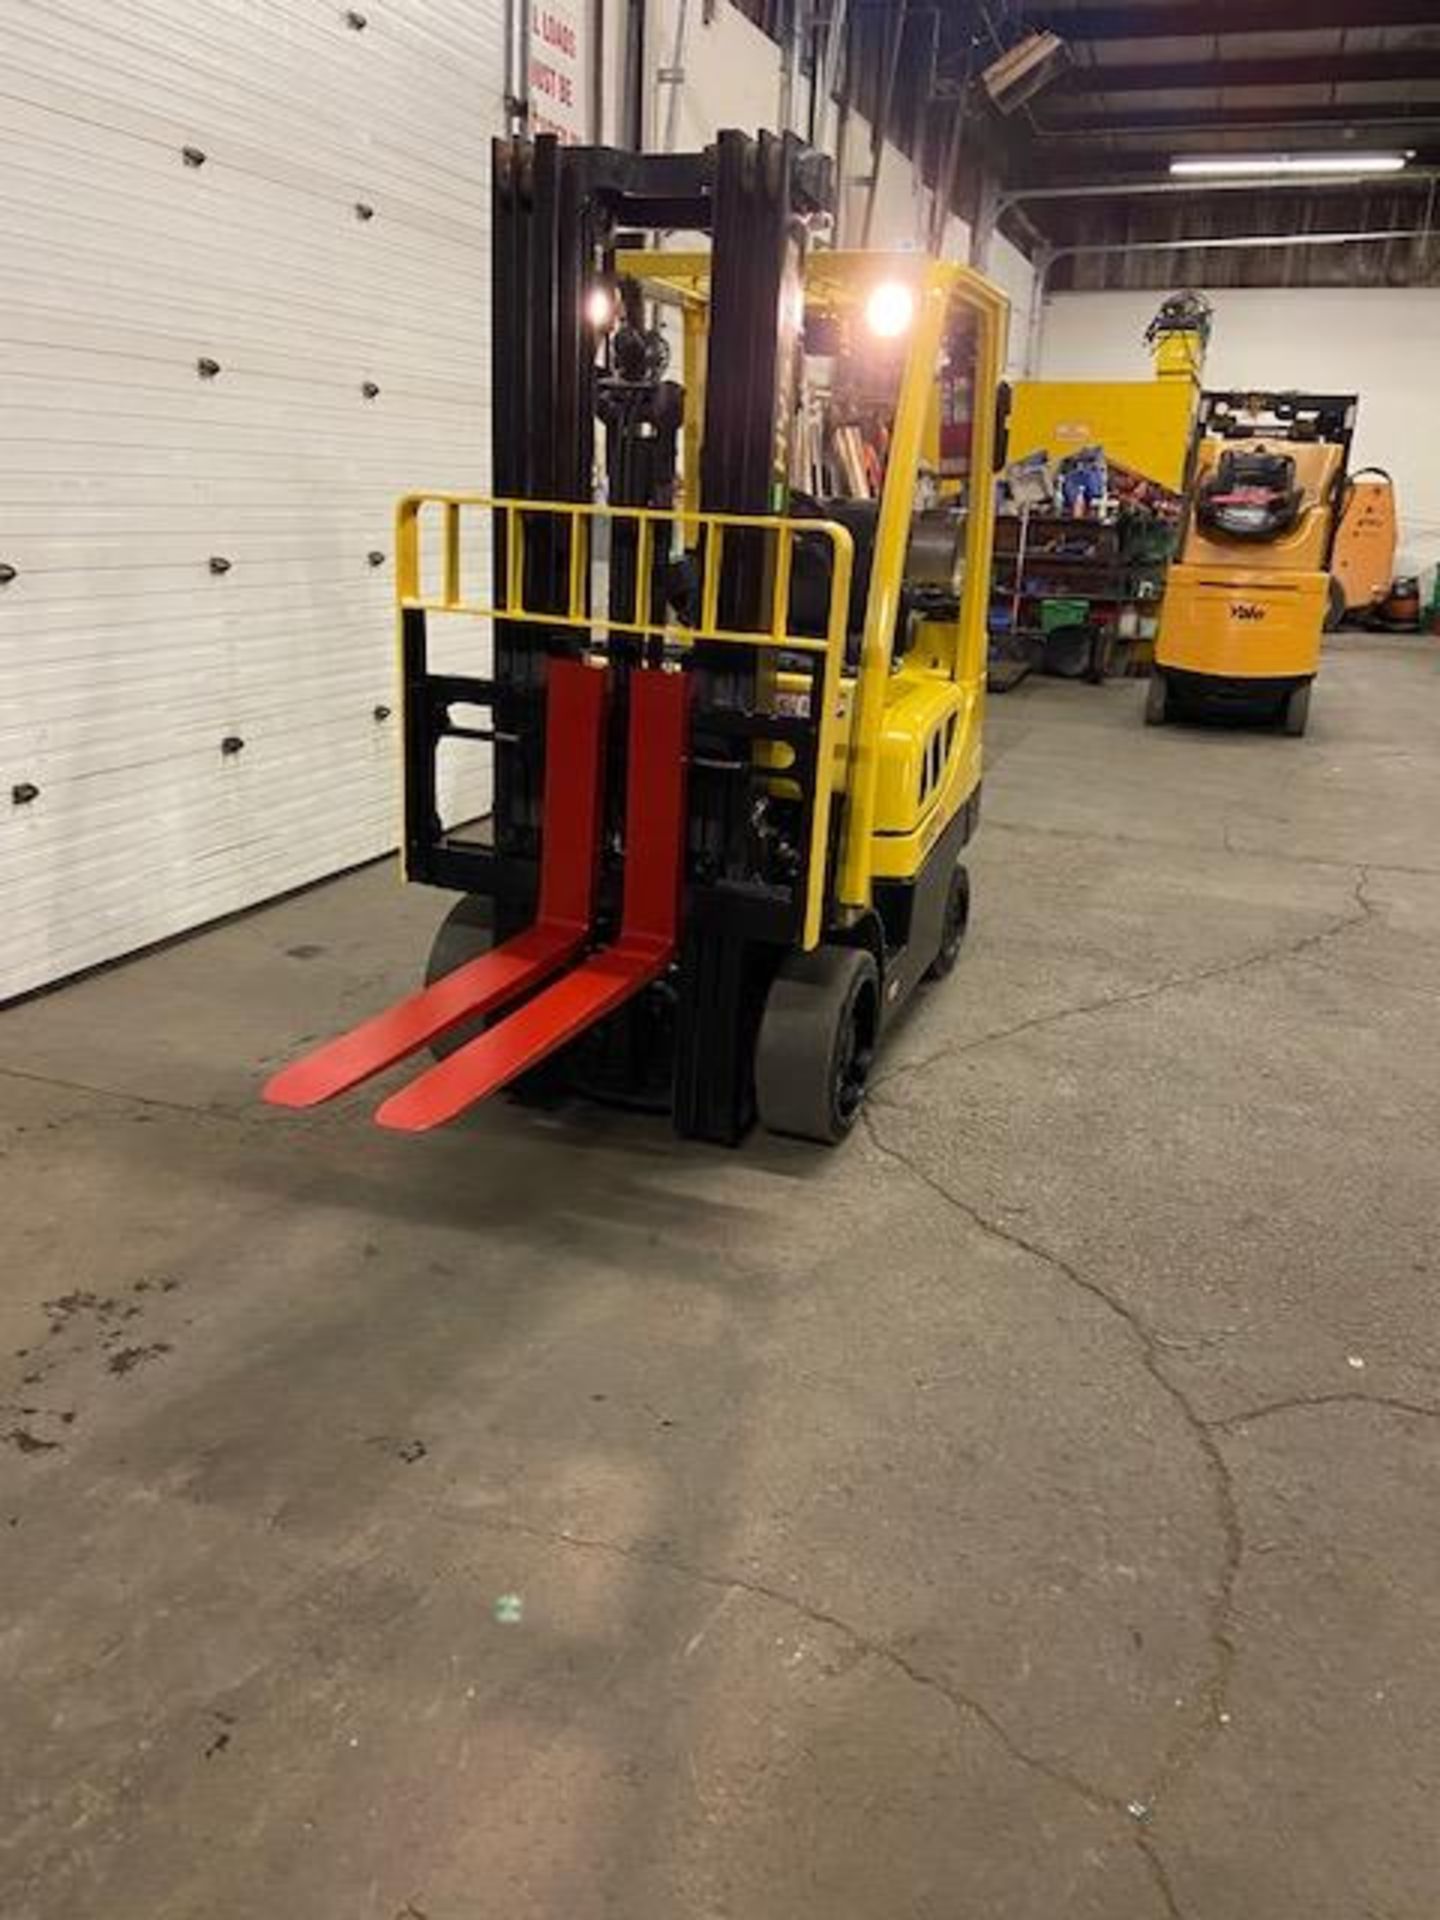 FREE CUSTOMS - 2016 Hyster 6000lbs Capacity Forklift LPG (propane) with 3-STAGE MAST with sideshift - Image 2 of 3